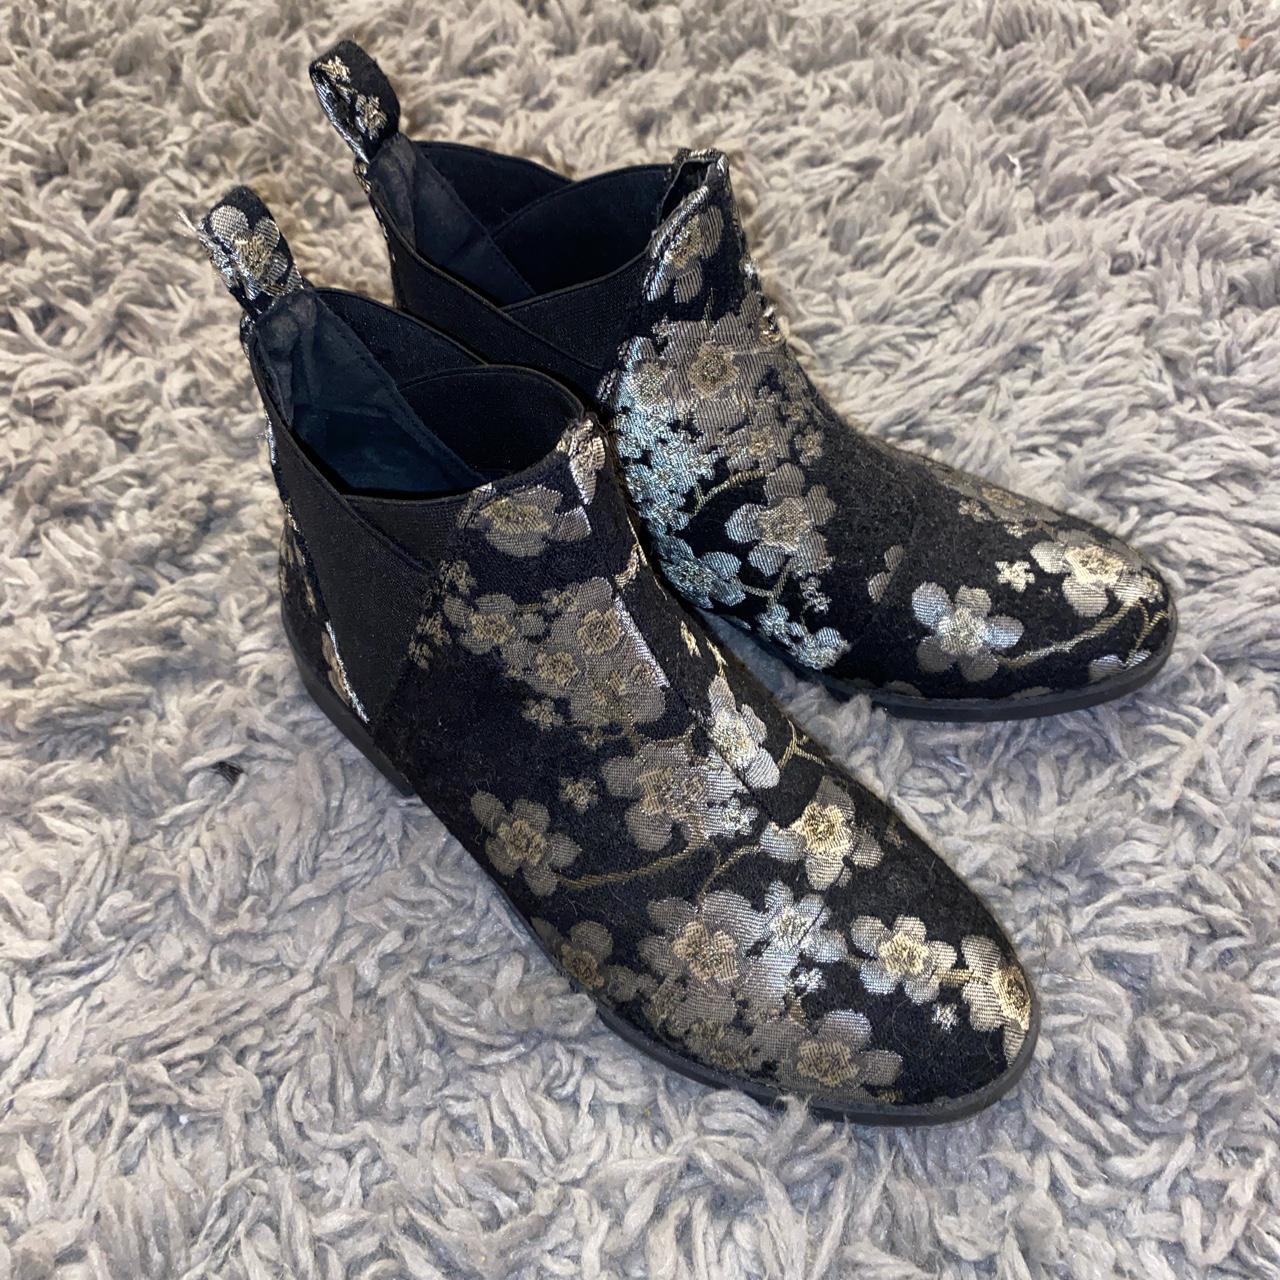 Primark Women's Black and Silver Boots | Depop